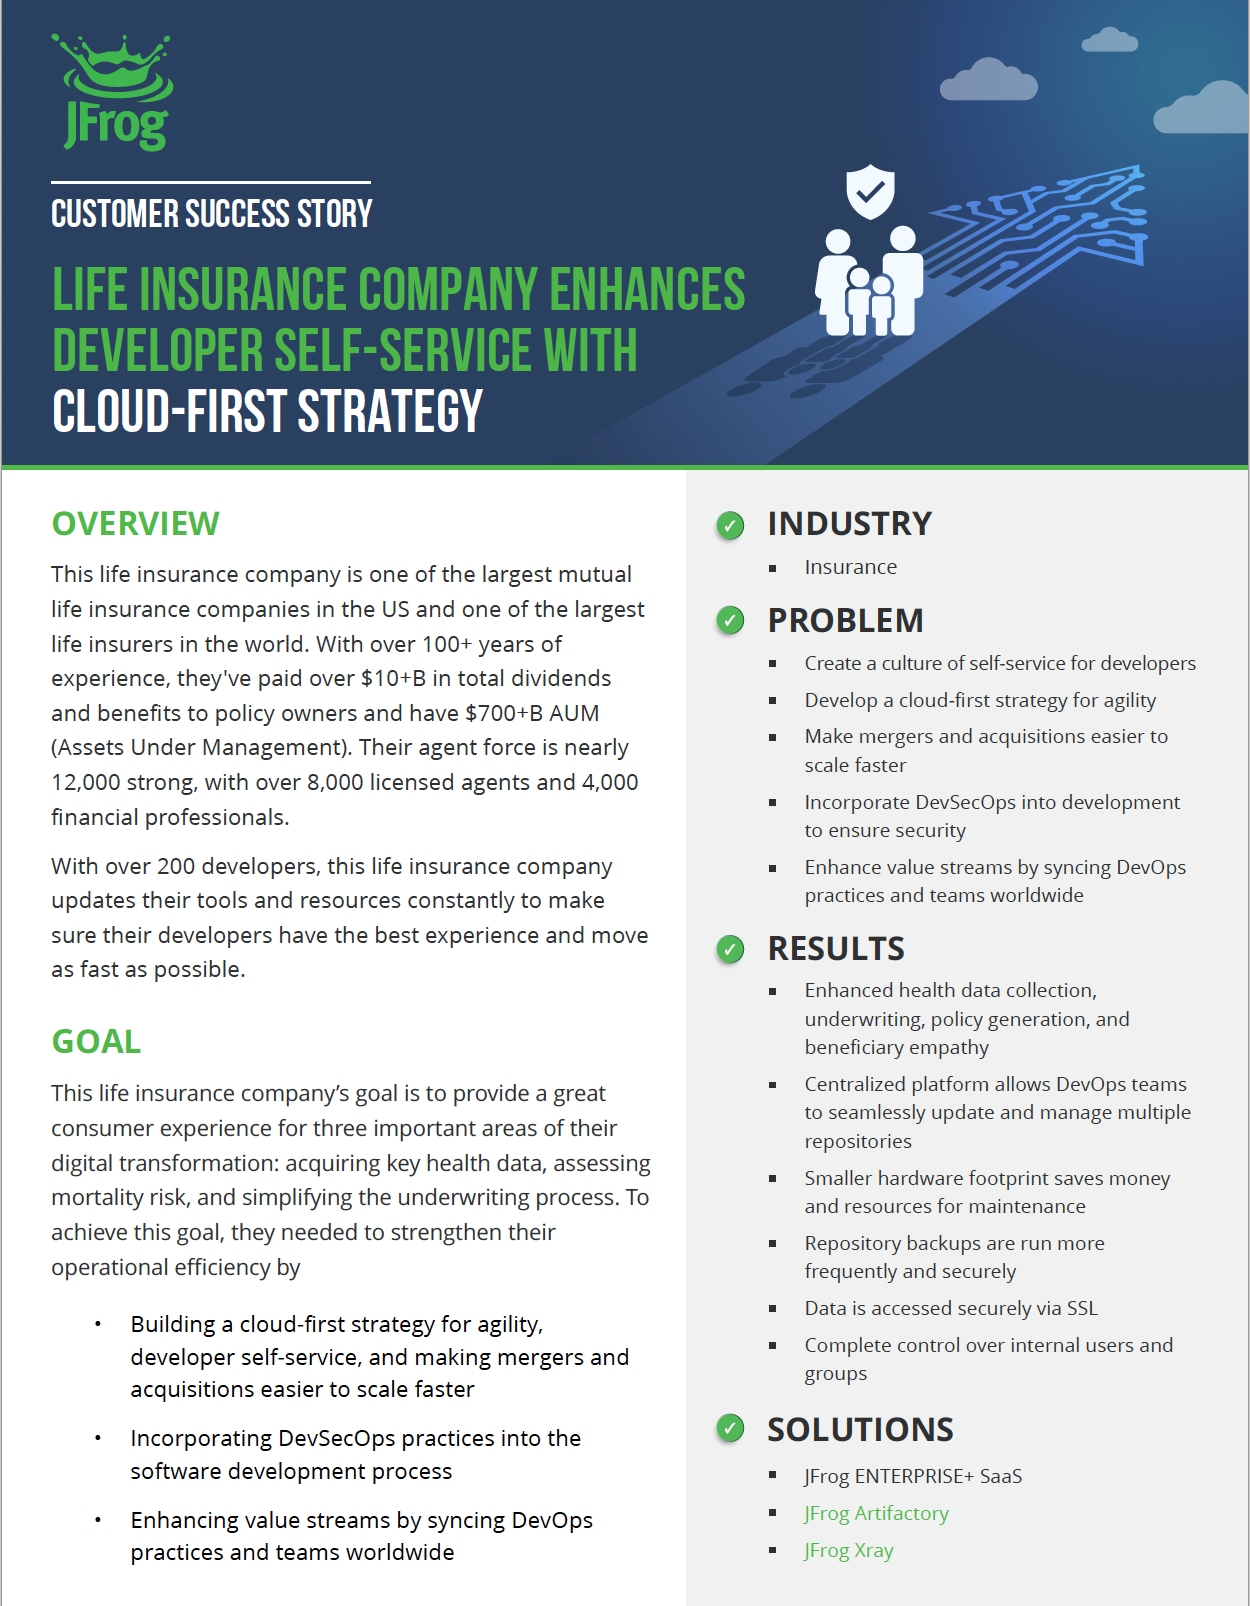 This insurance company partnered with JFrog to migrate its on-prem infrastructure to the cloud, resulting in significant improvement in build times. Read the success study.